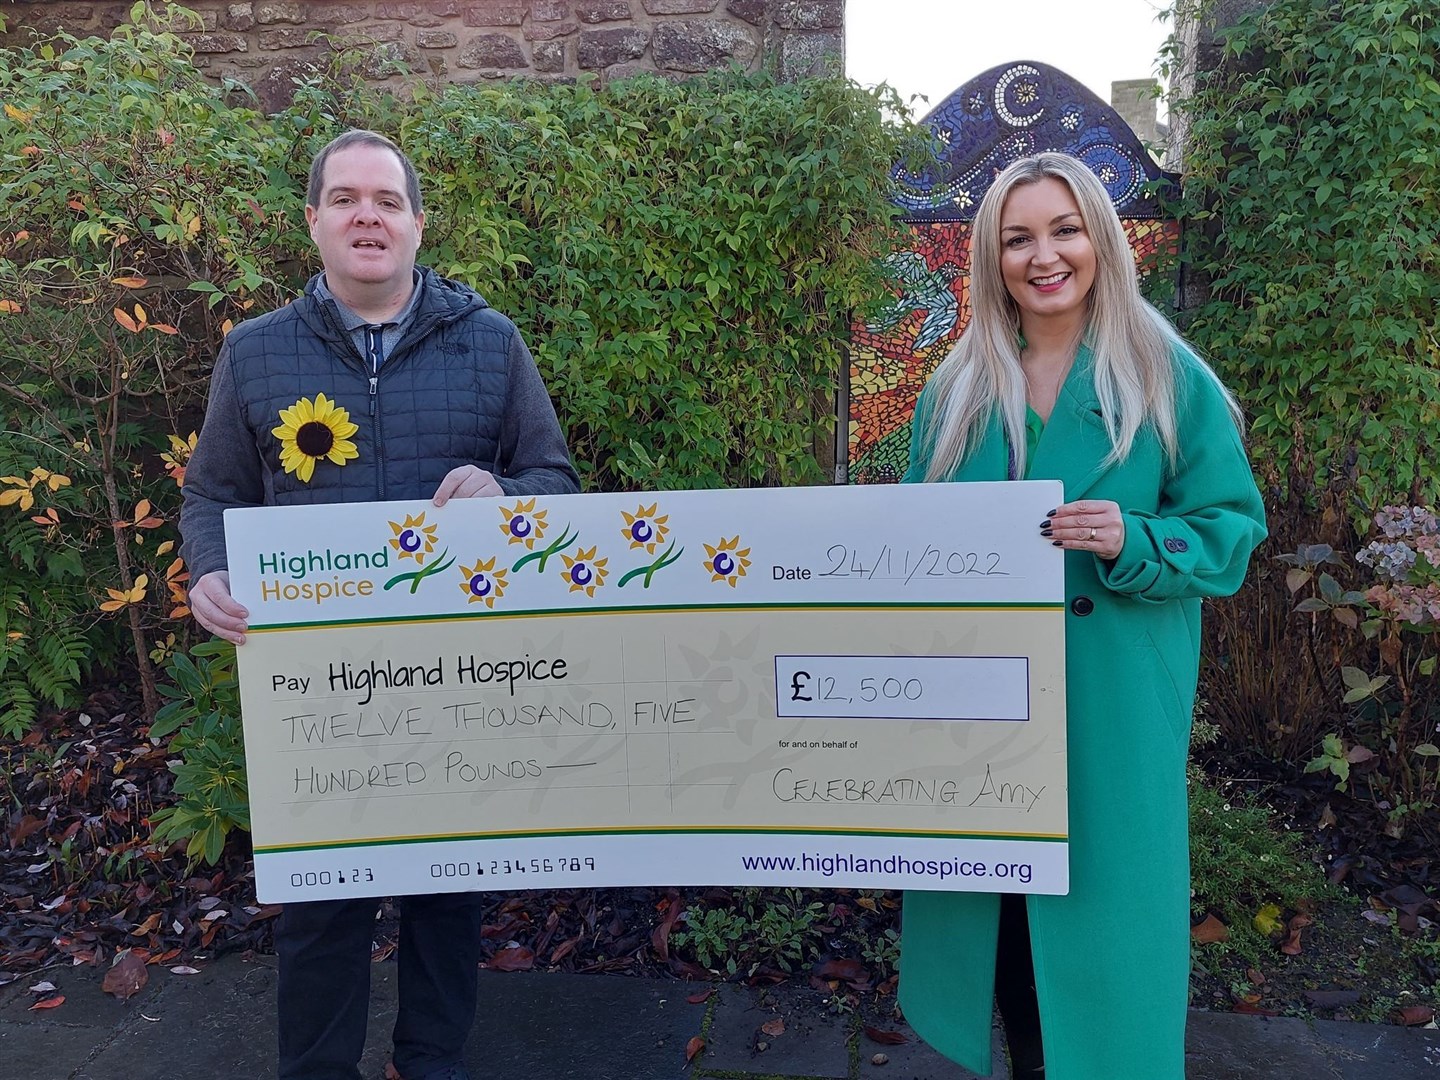 Gary Tuach hands over £12,5000 to Highland Hospice. The same sum went to Mikeysline.